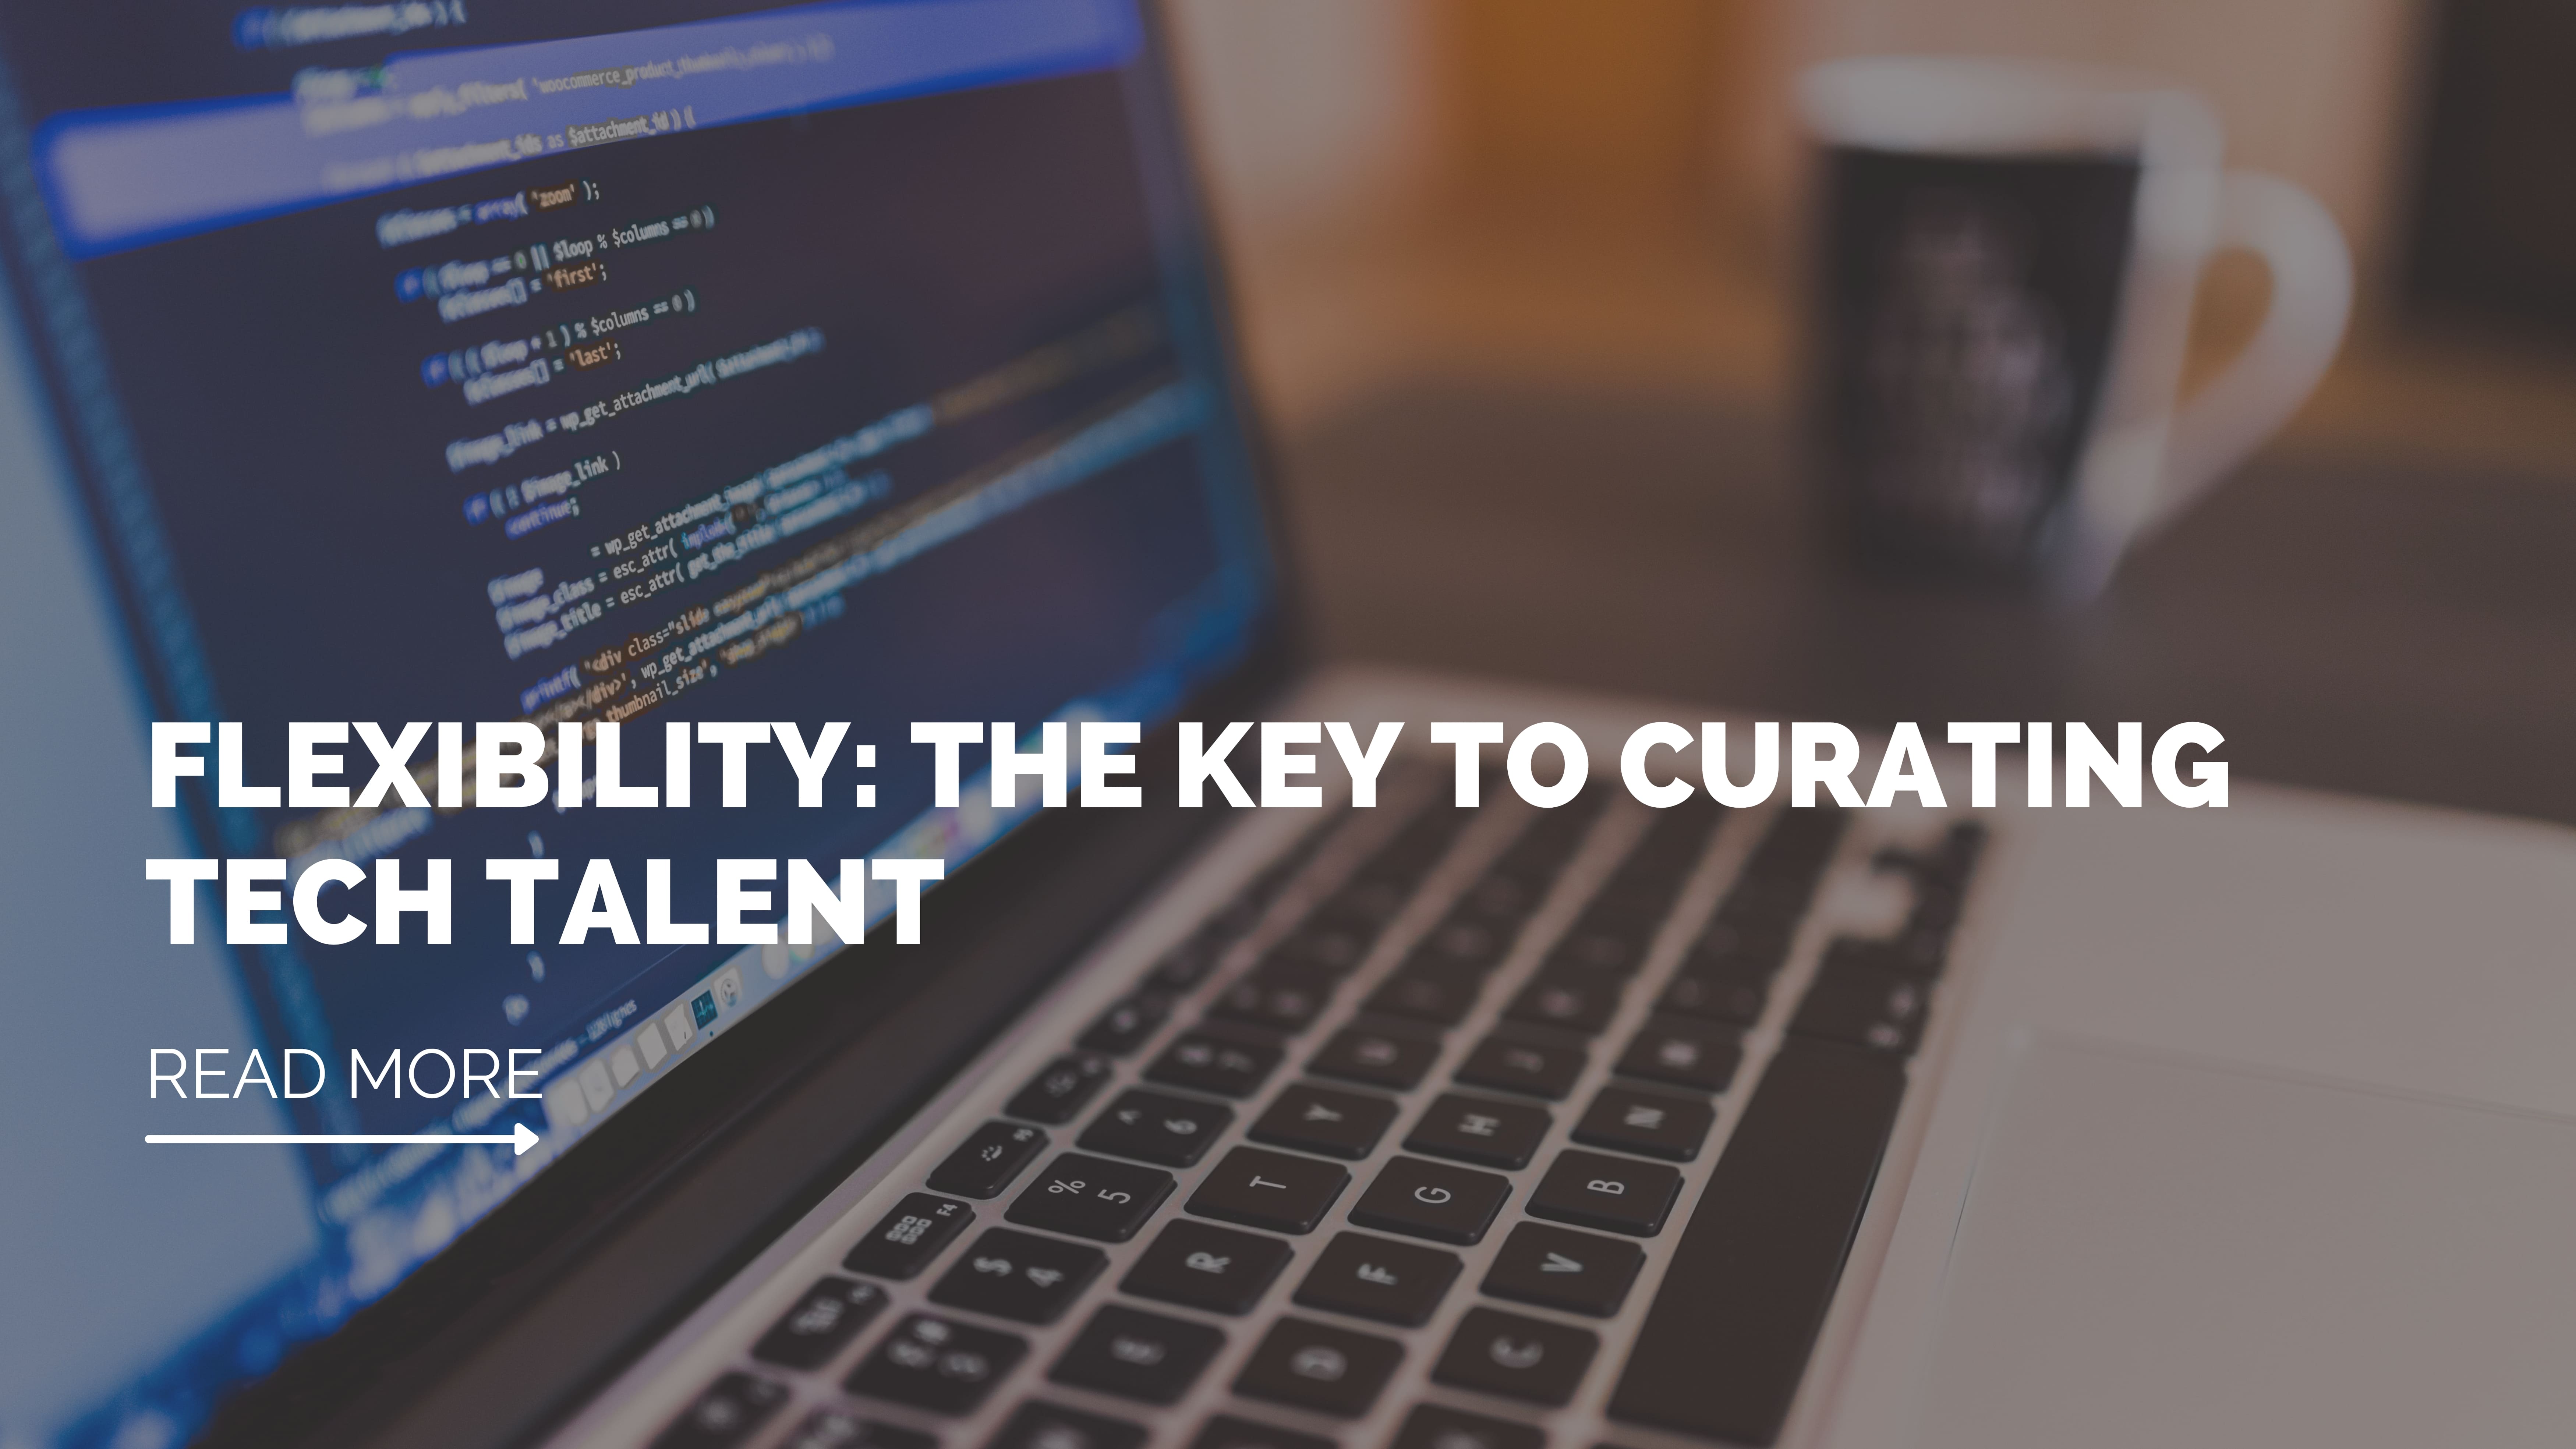 Flexibility The key to curating tech talent